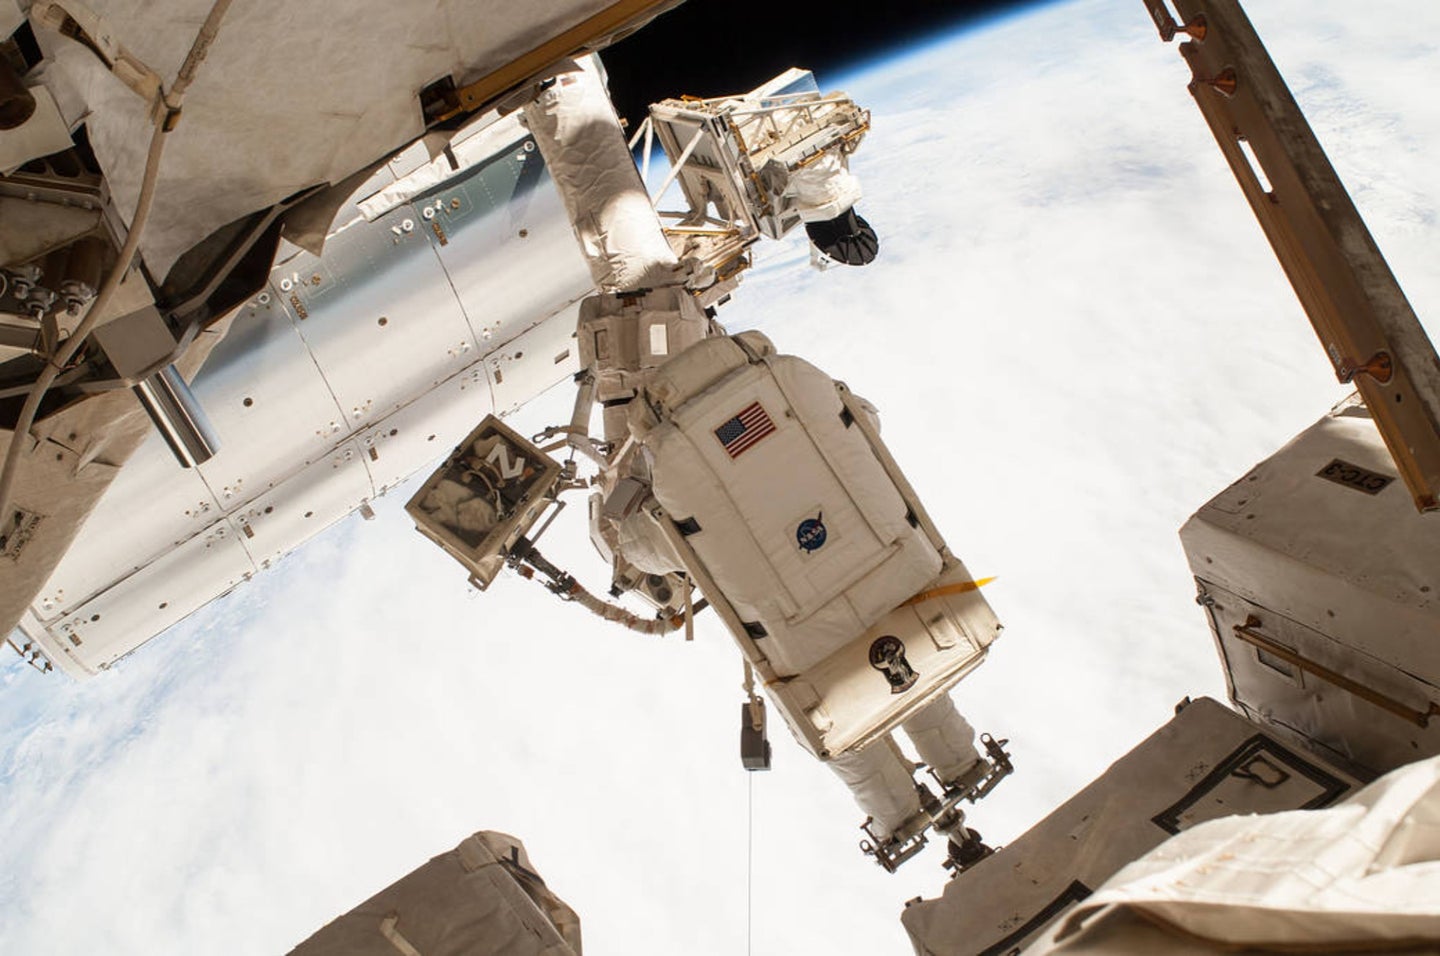 NASA astronaut Terry Virts on a spacewalk as the Earth's surface passes by in the background on February 25, 2015. 